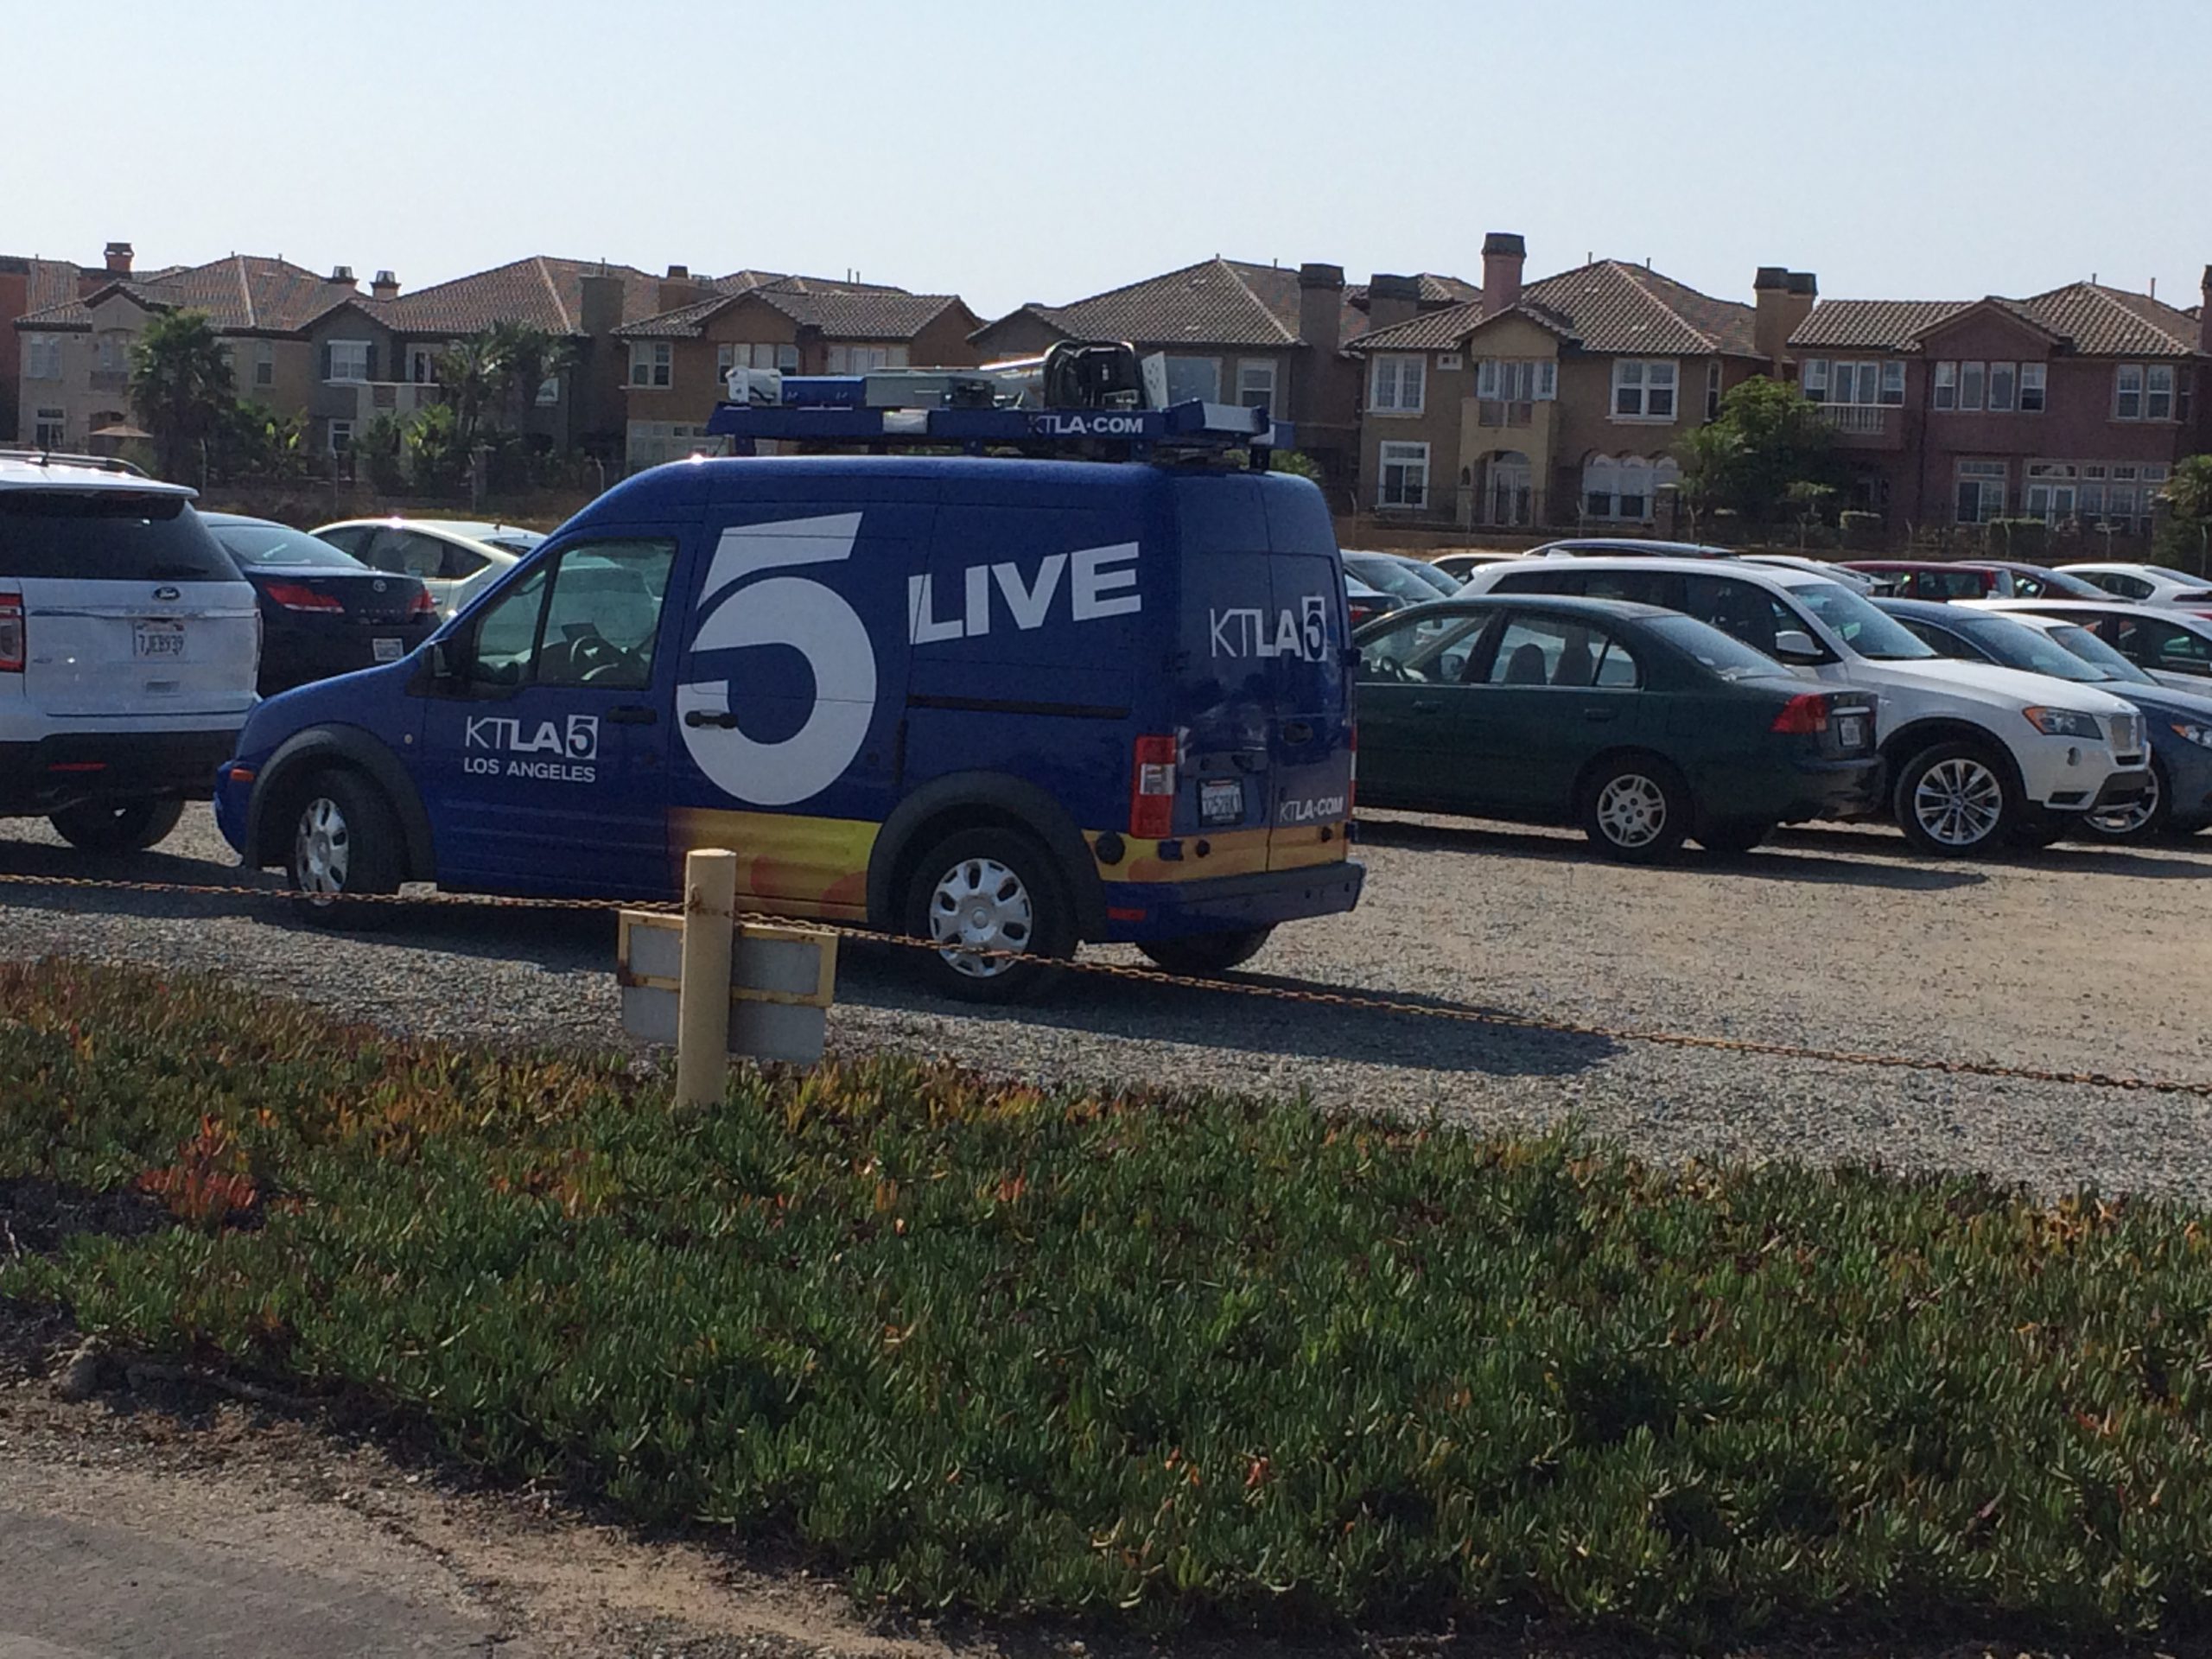 News van covering the 10th anniversary celebration of the Bolsa Chica Lowlands Restoration Project.